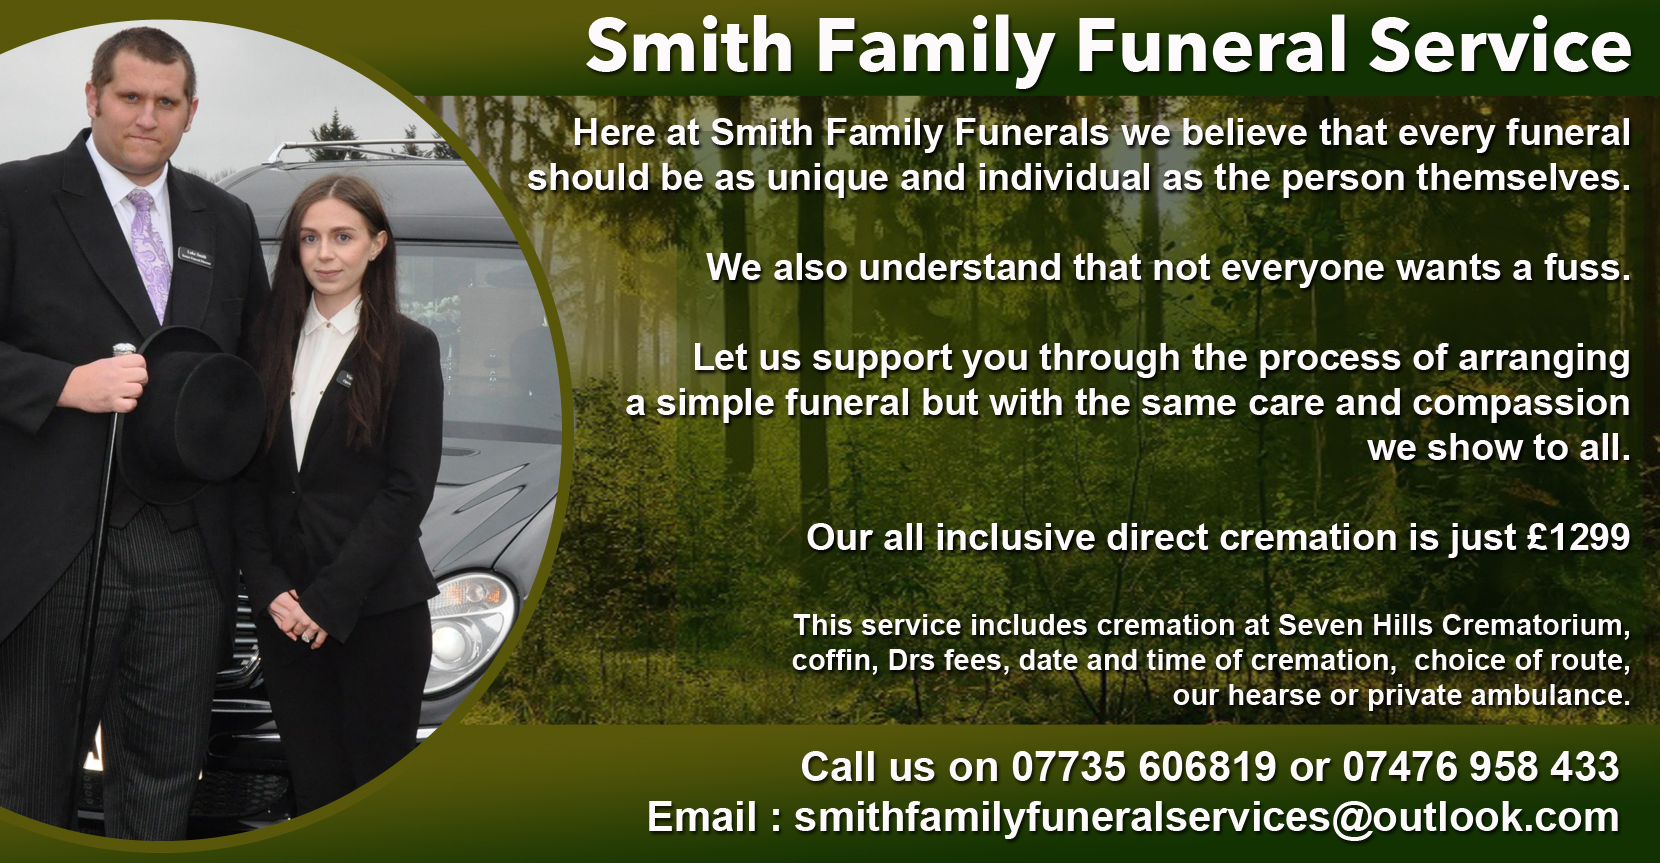 Smith Family Funeral Services